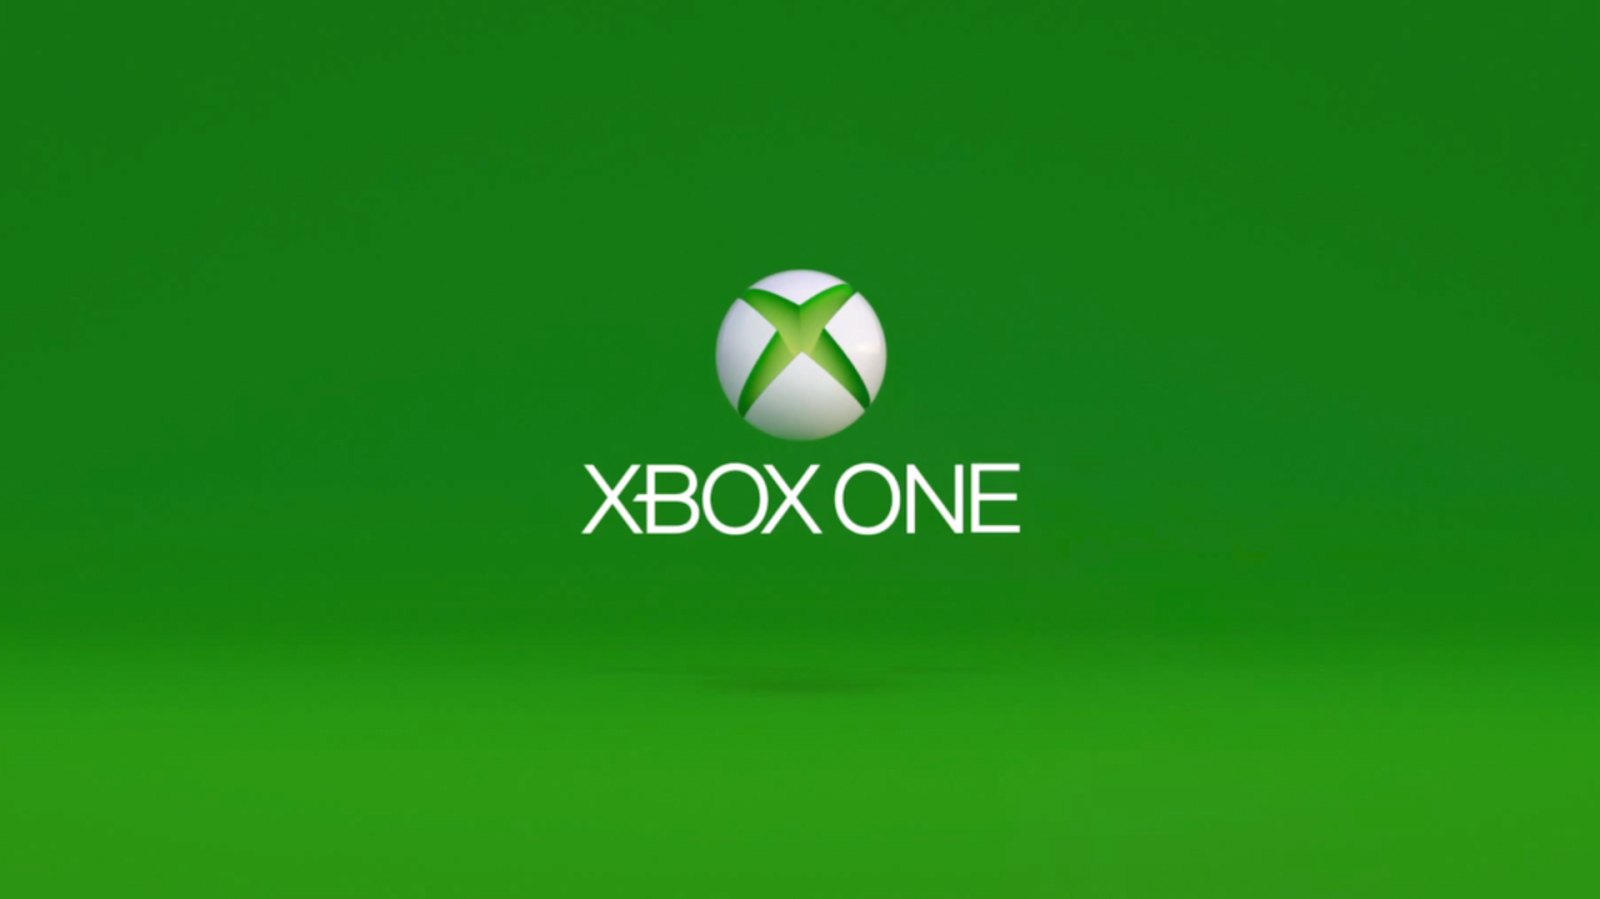  got some news for xbox users regarding 4k and 3d the new xbox one will